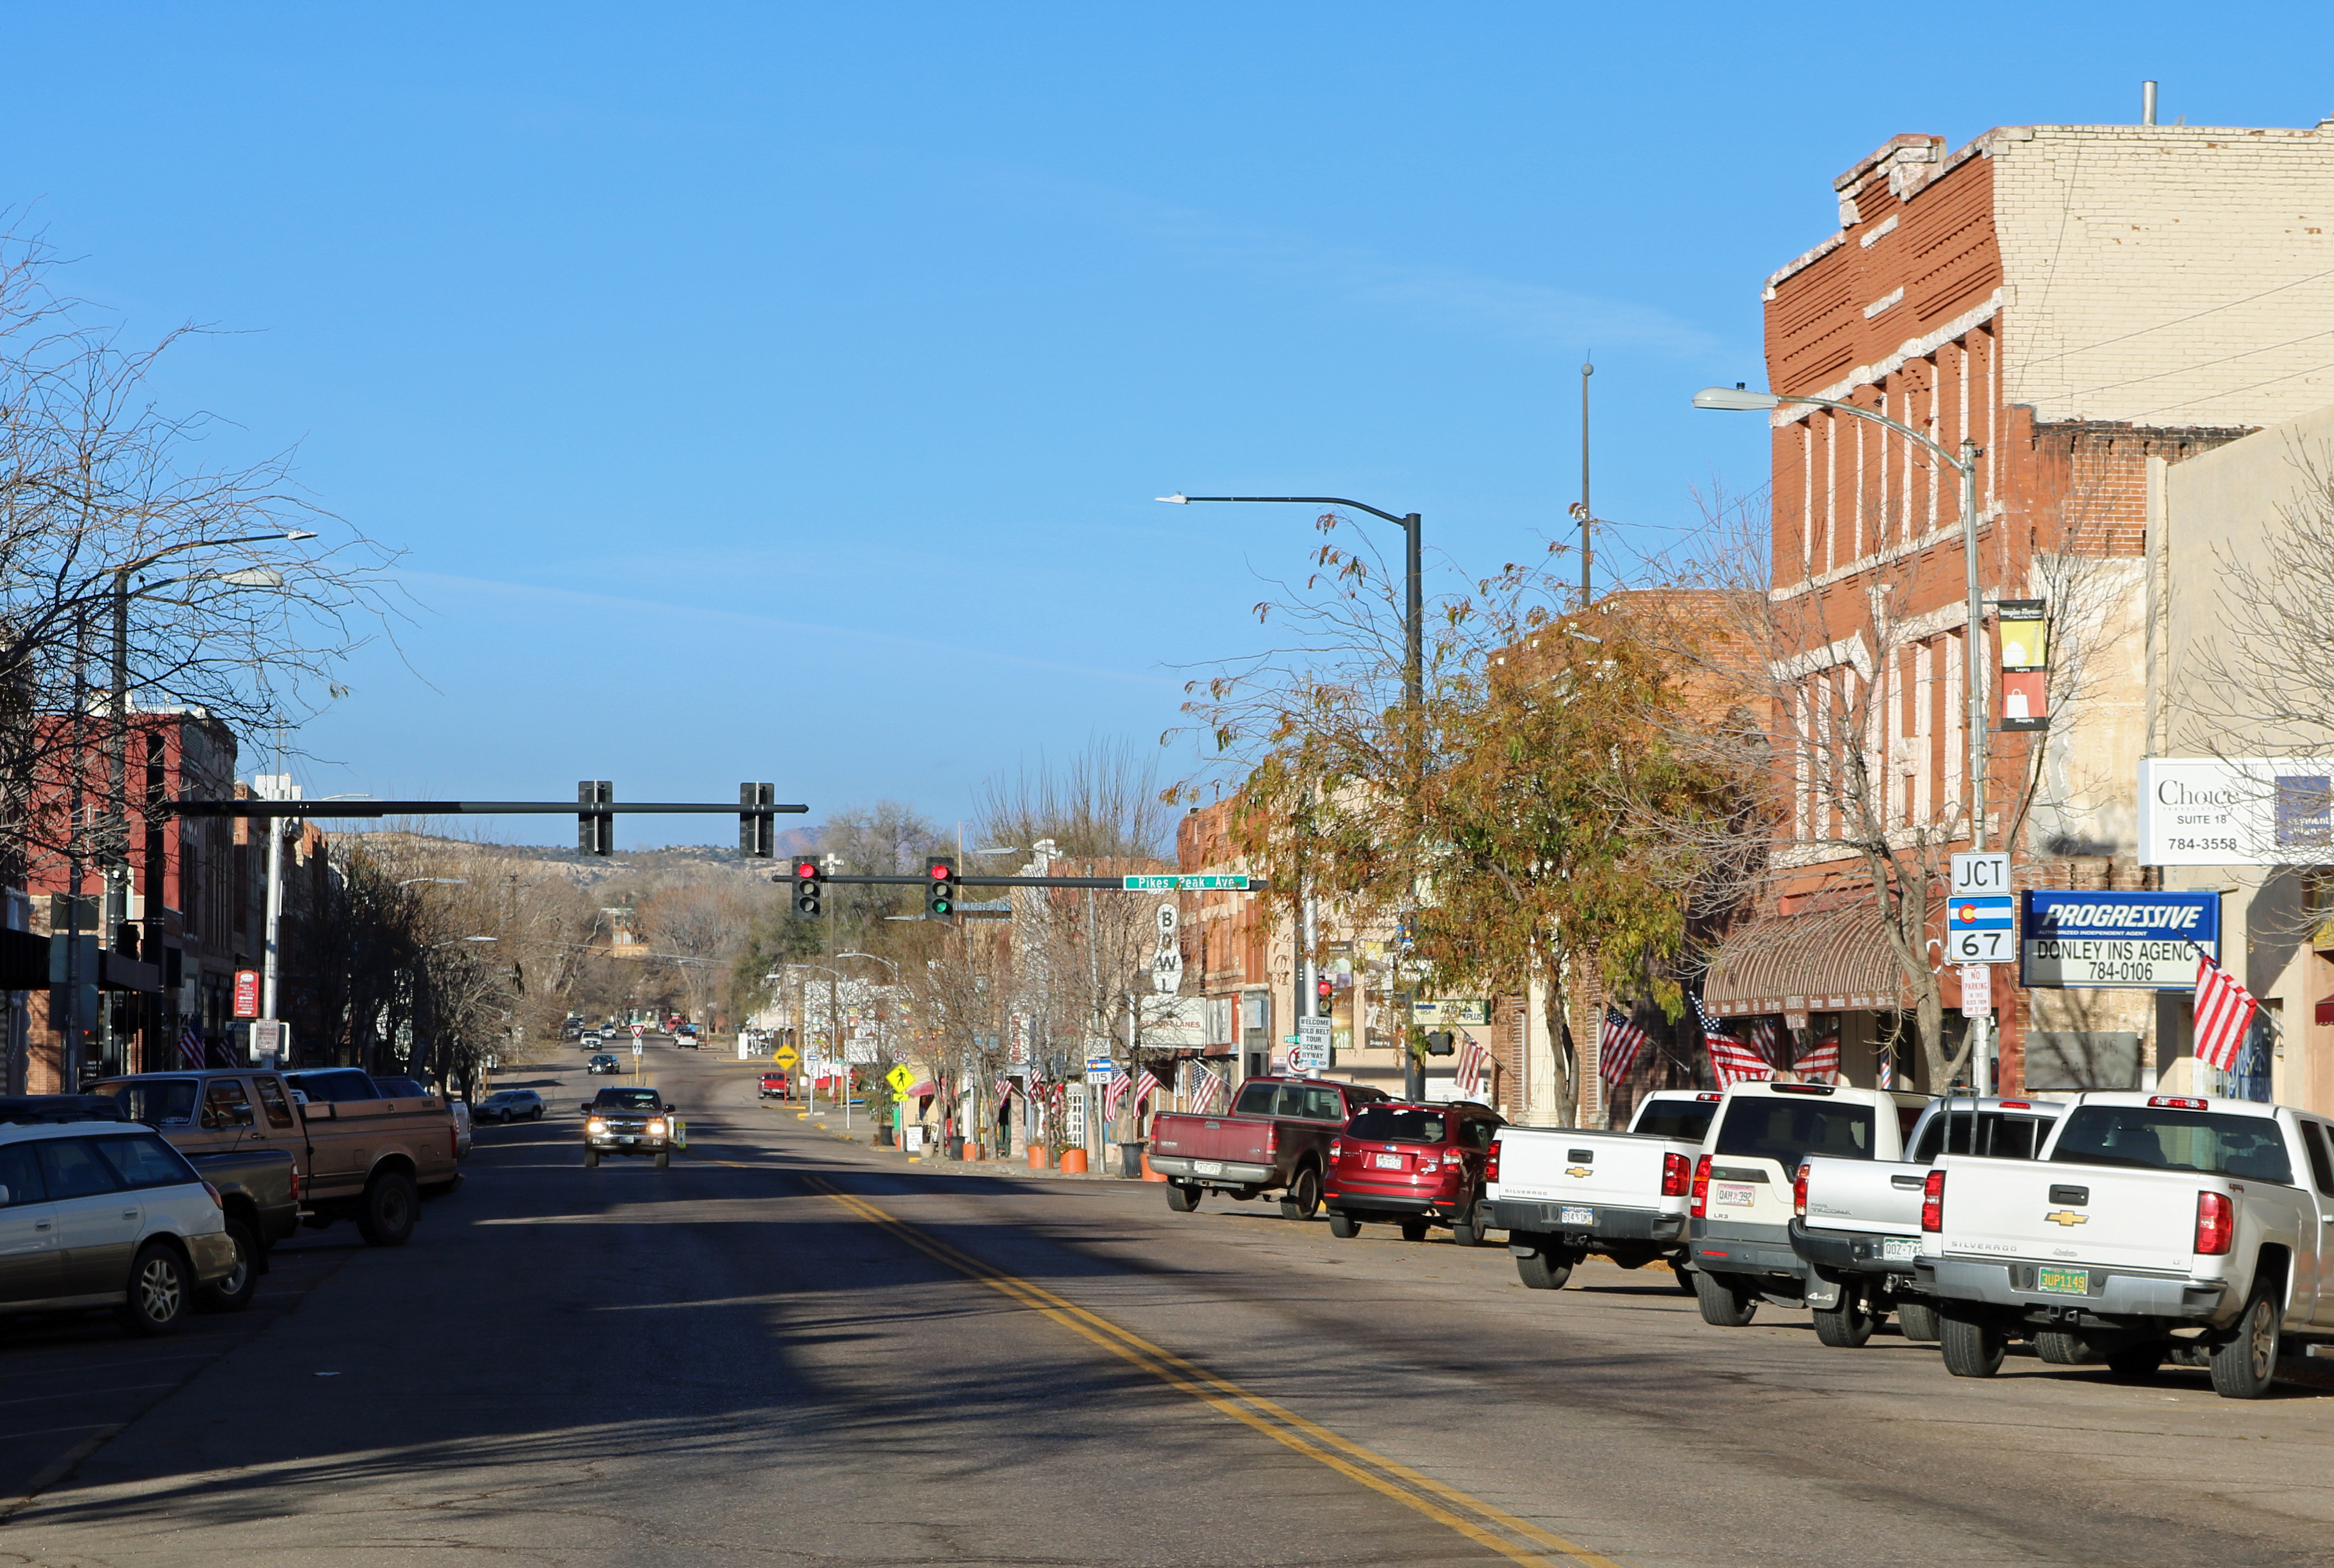 File:Downtown Florence Historic District.JPG - Wikimedia Commons